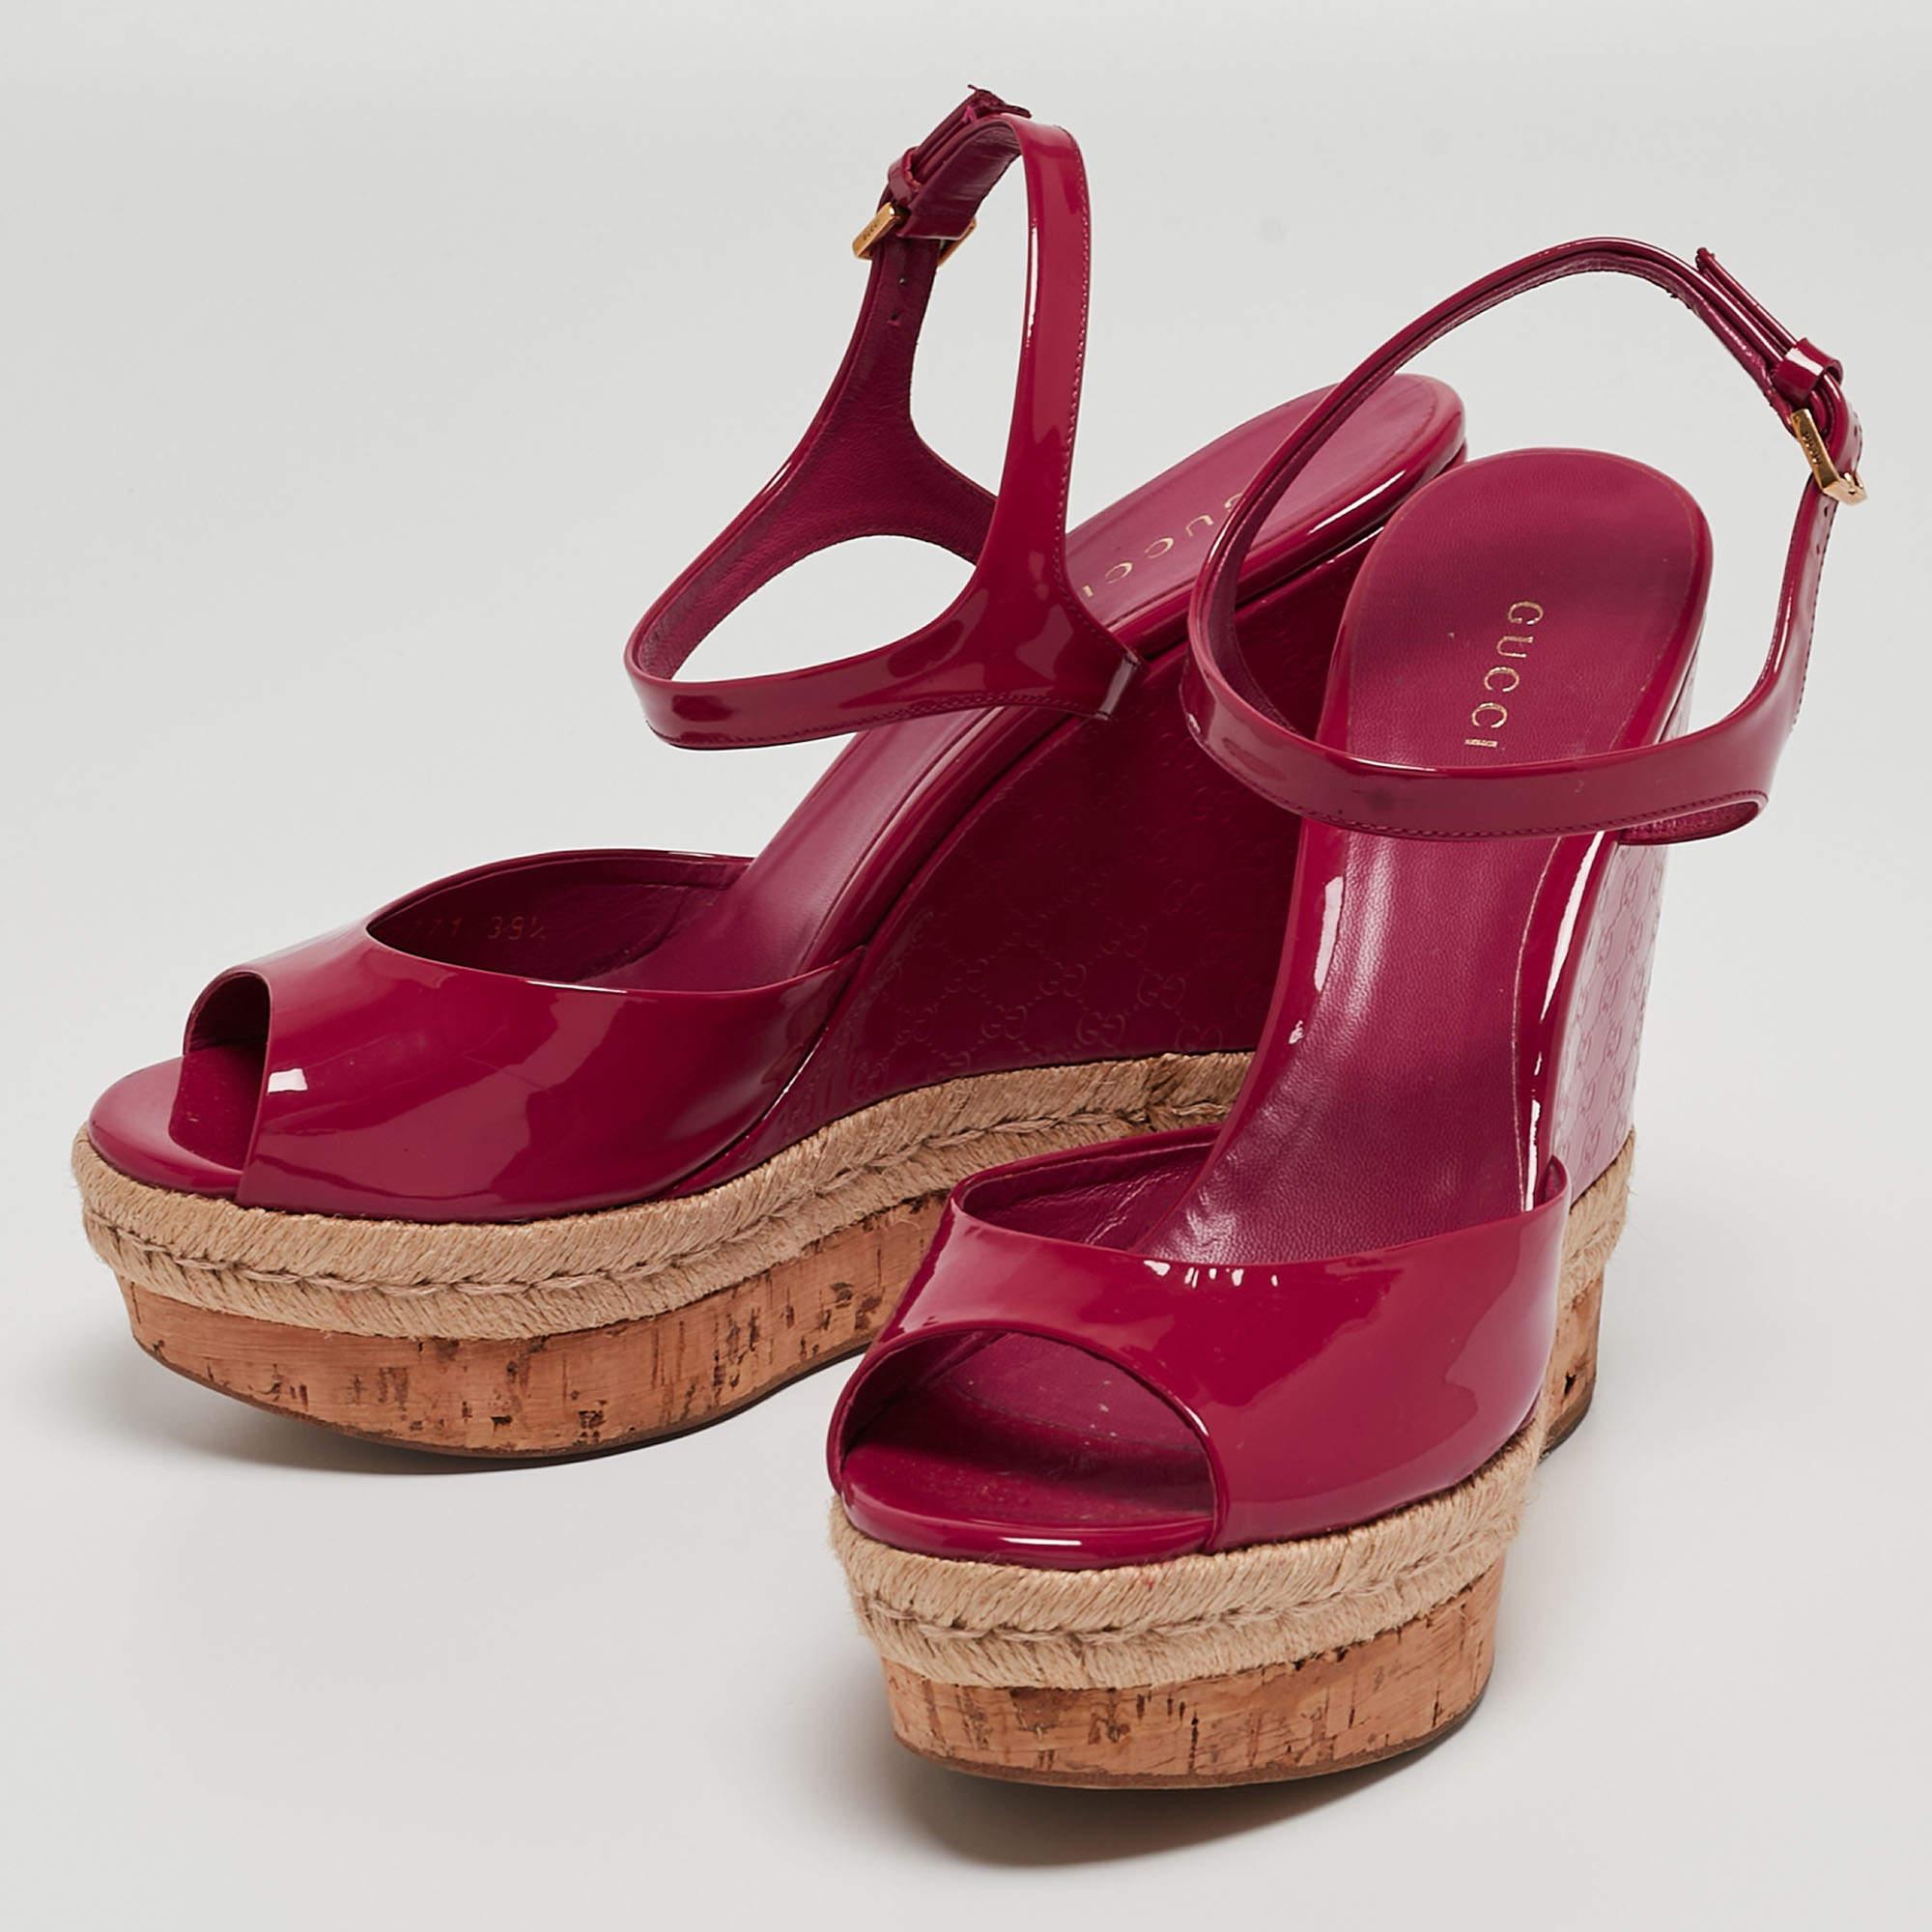 Gucci Pink Patent Leather Hollie Wedge Sandals Size 39.5 For Sale 4